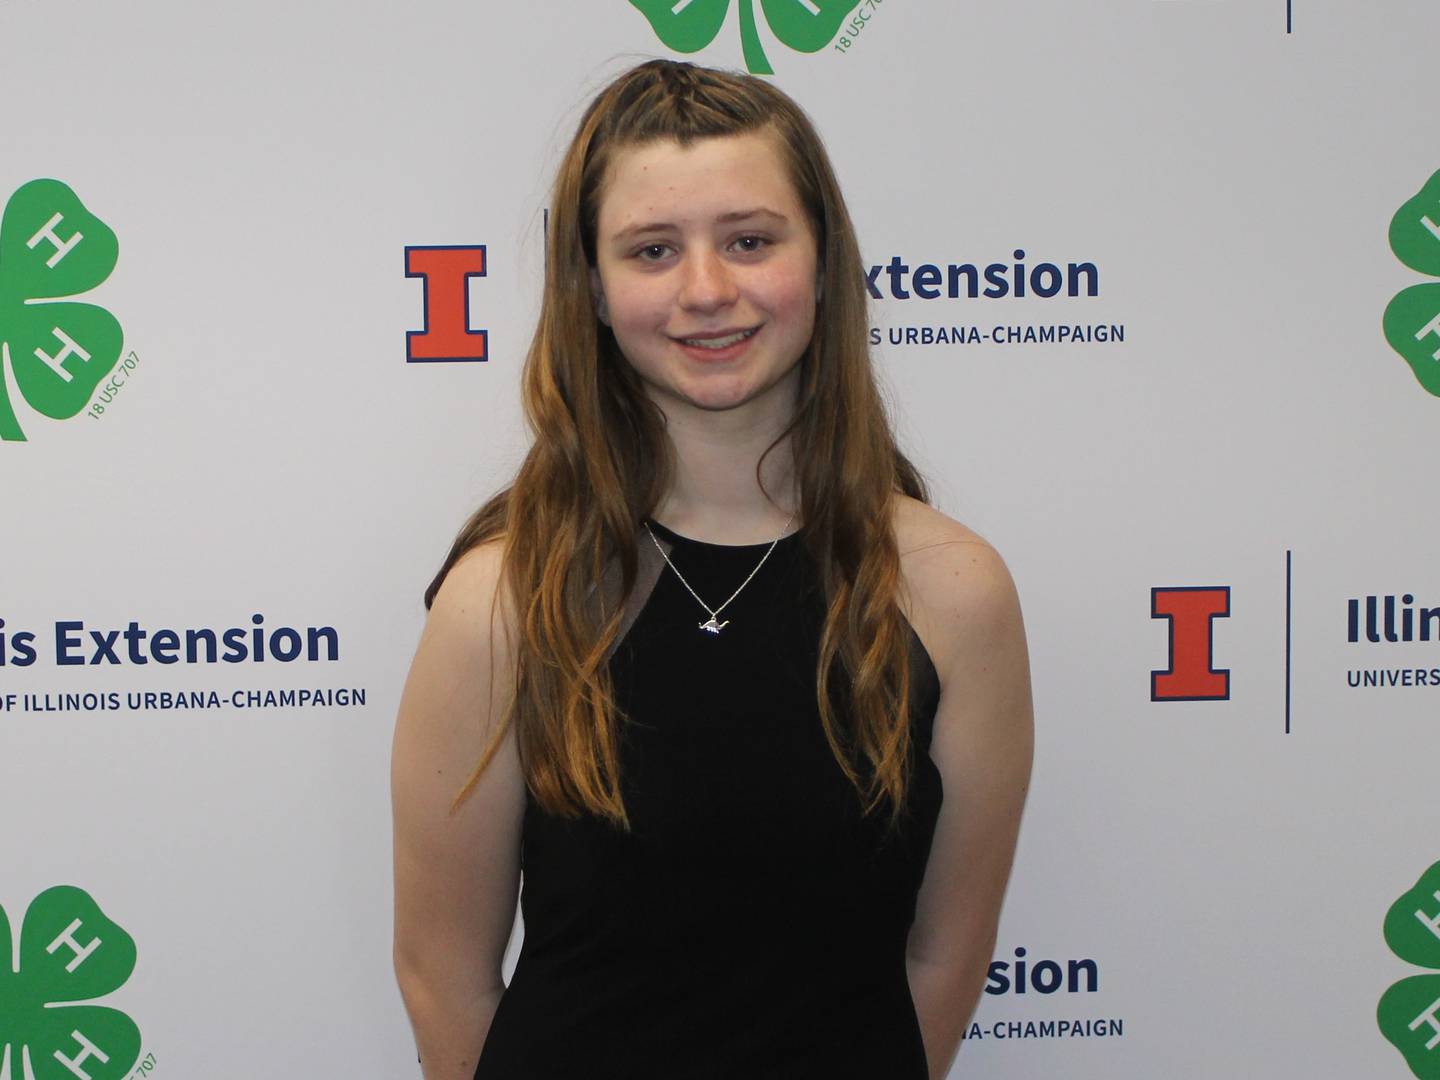 Pictured: Marshall-Putnam County 4-Her Cadence Breckenridge at the Illinois 4-H State Public Speaking Contest